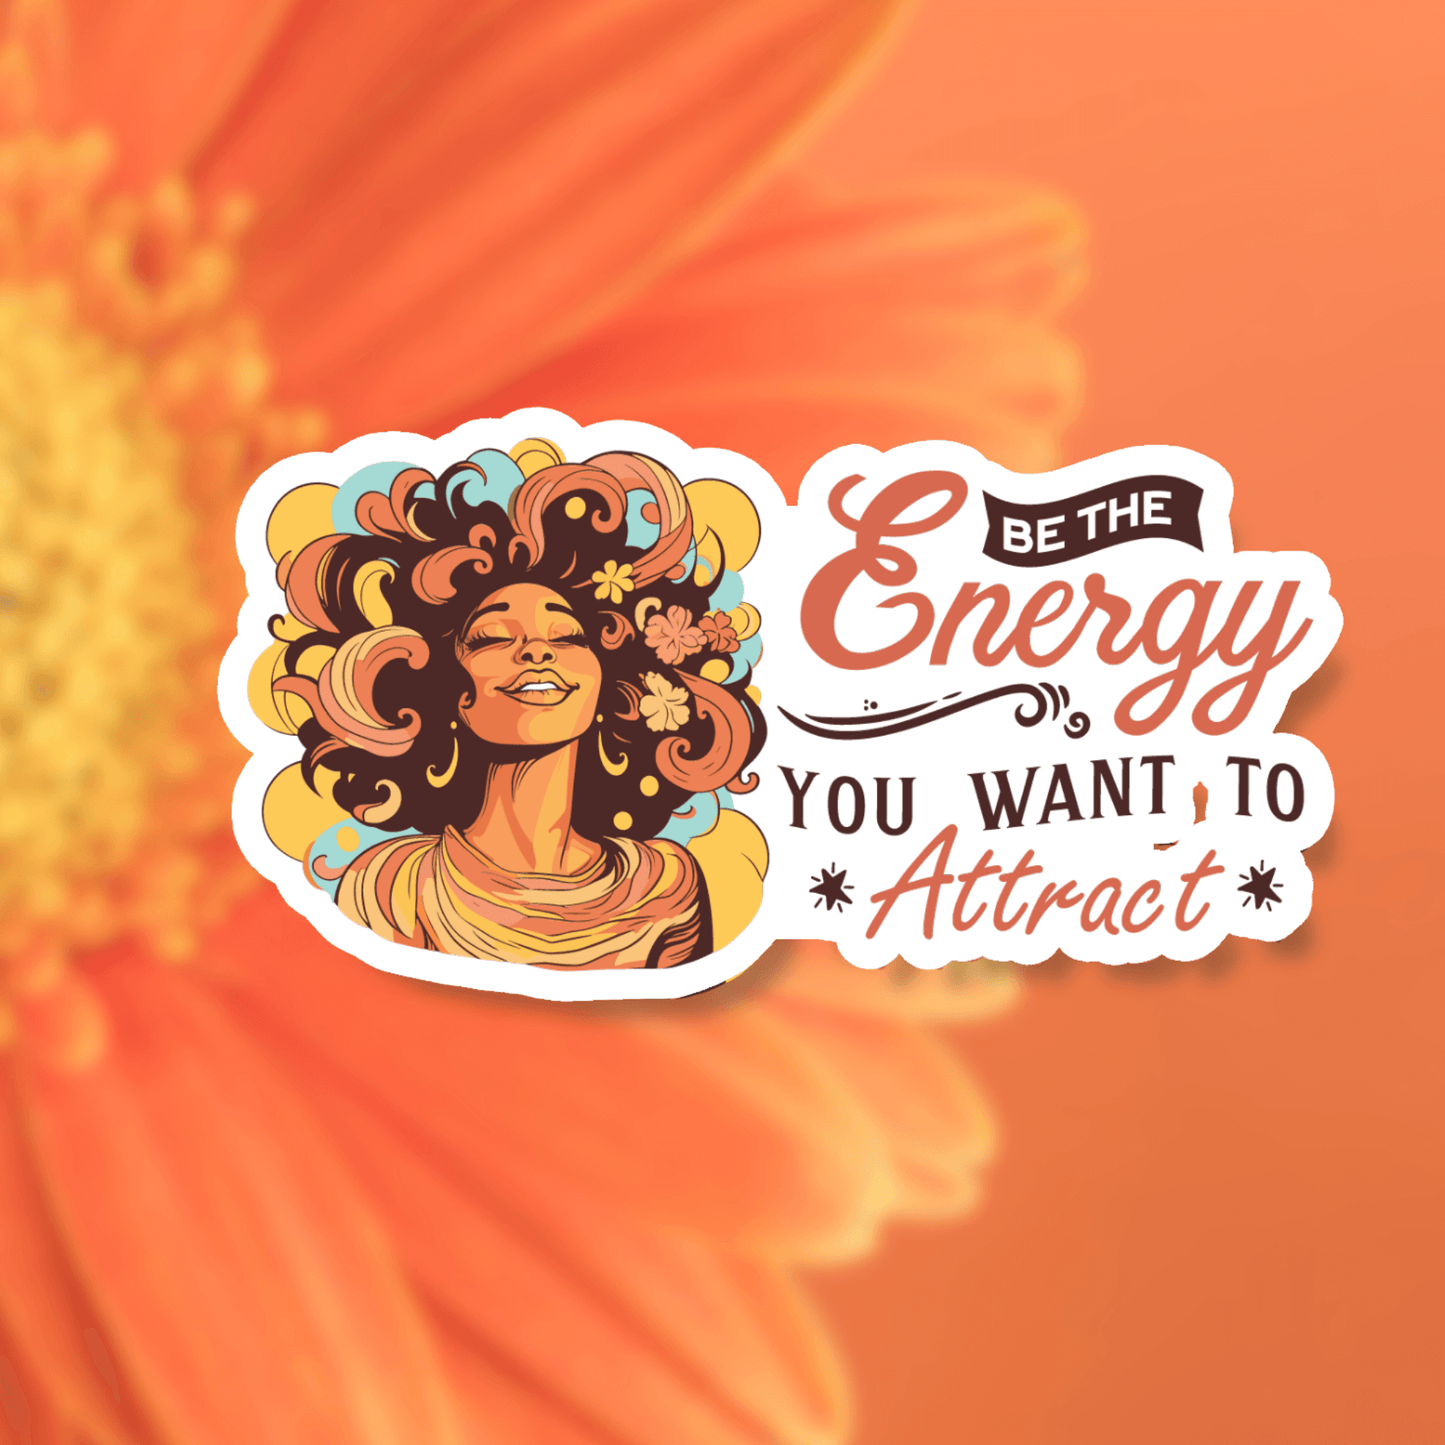 "Be The Energy You Want to Attract" Positive Affirmation Sticker | Melanin Sticker - TheHauteIcon